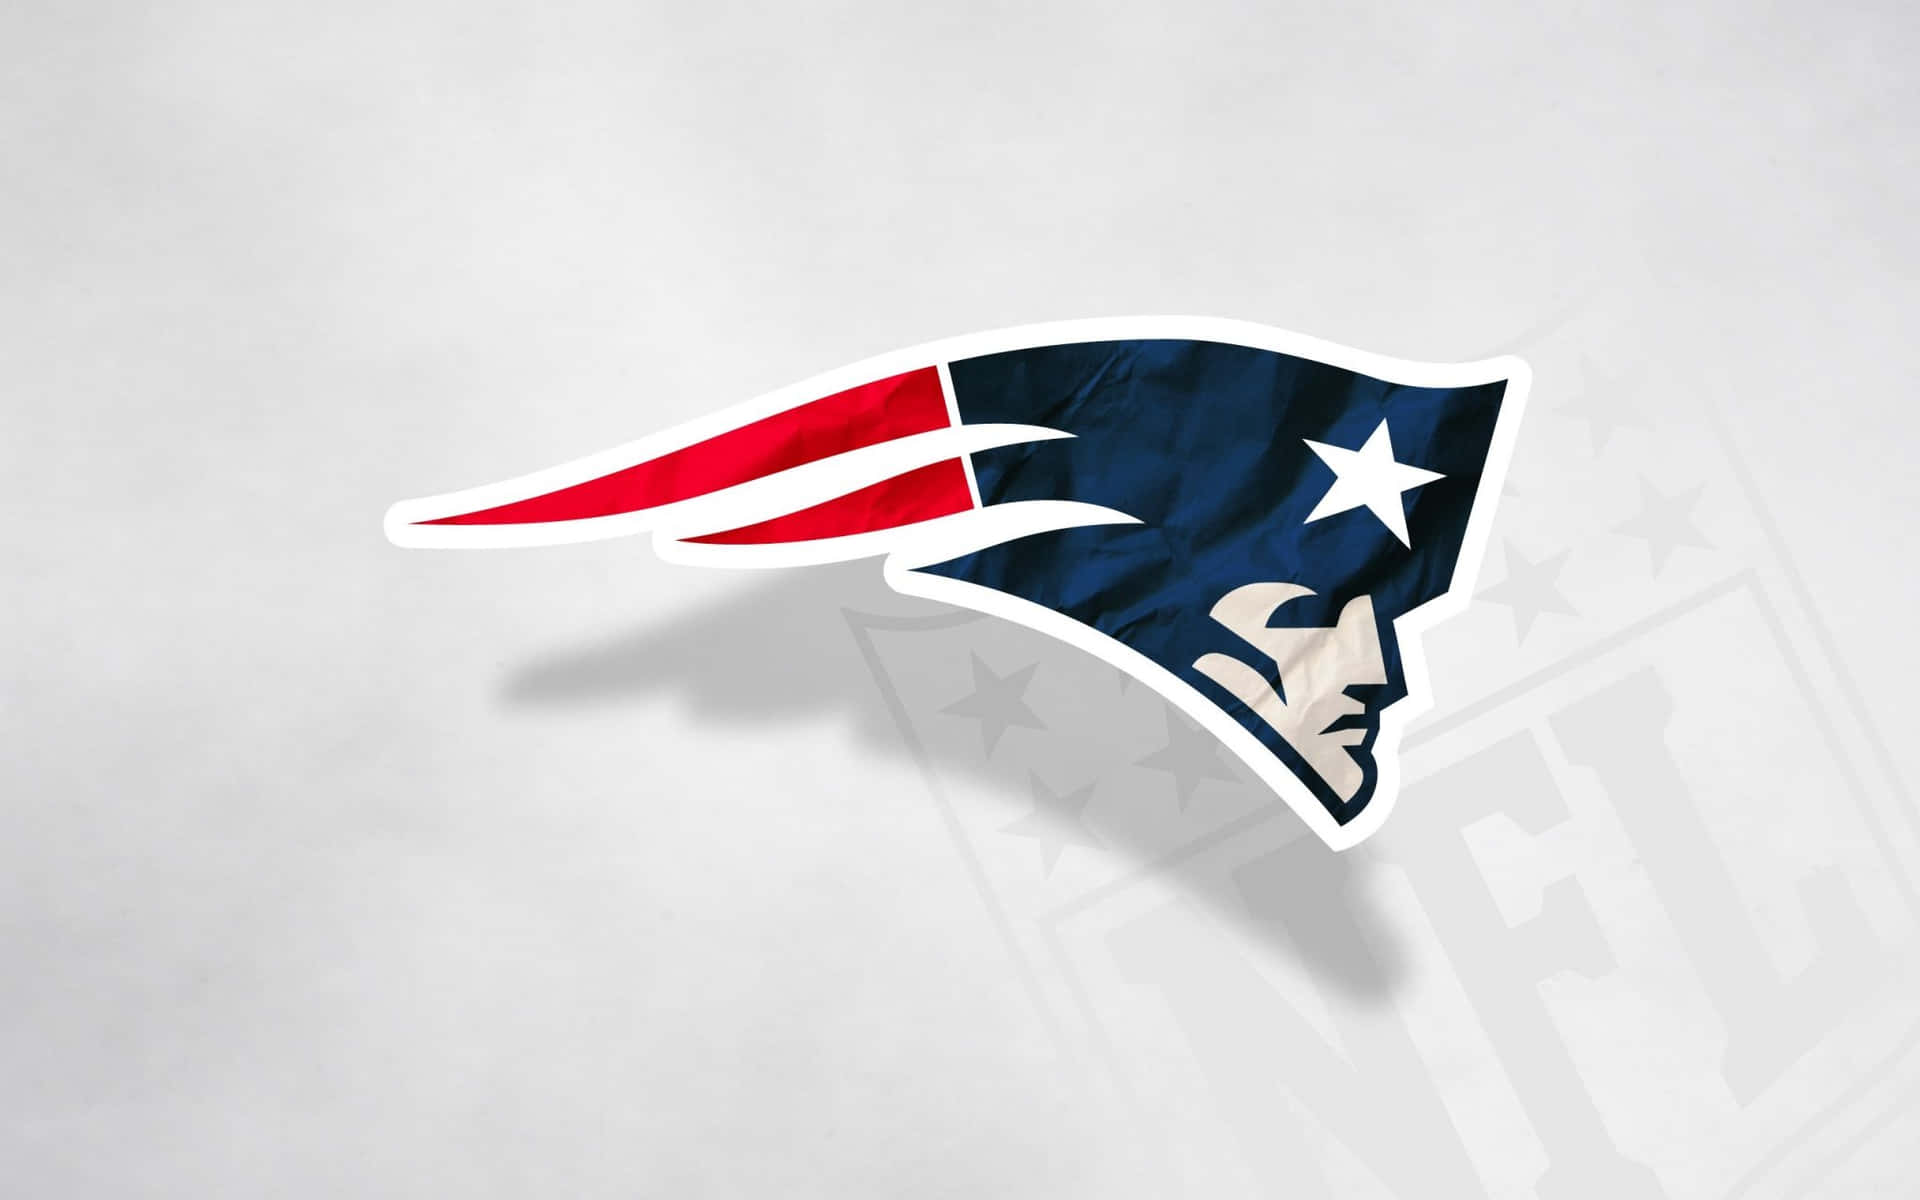 Let's All Get Behind The Patriots, Proudly Show Your Team Spirit With This Vibrant Desktop Wallpaper.